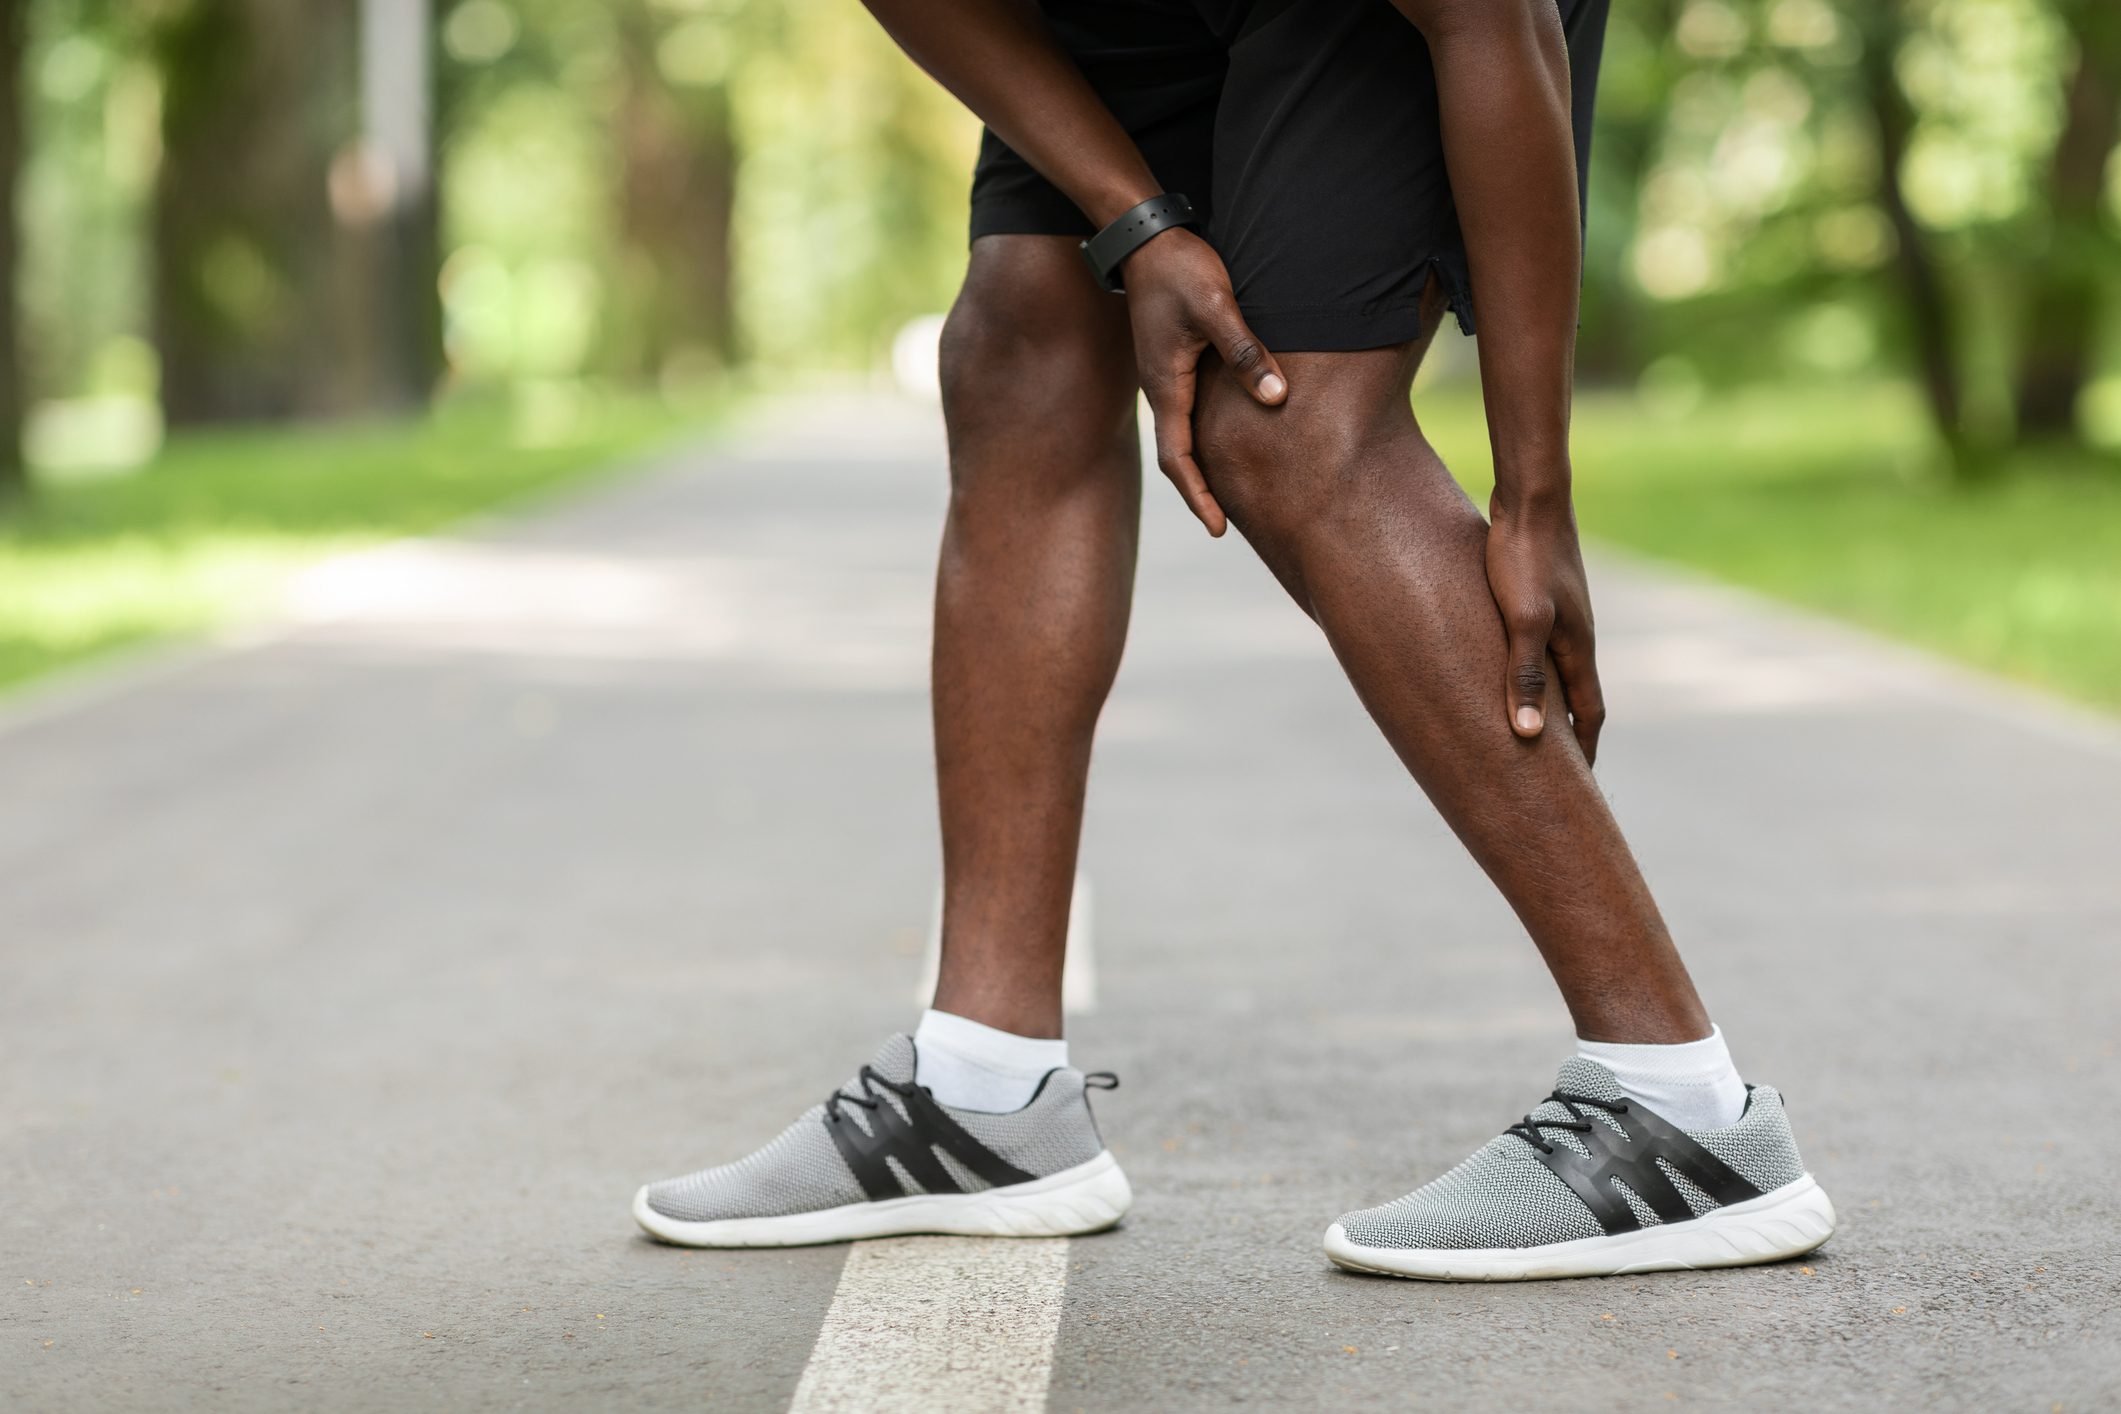 Charley Horse: What It Is and How to Prevent It